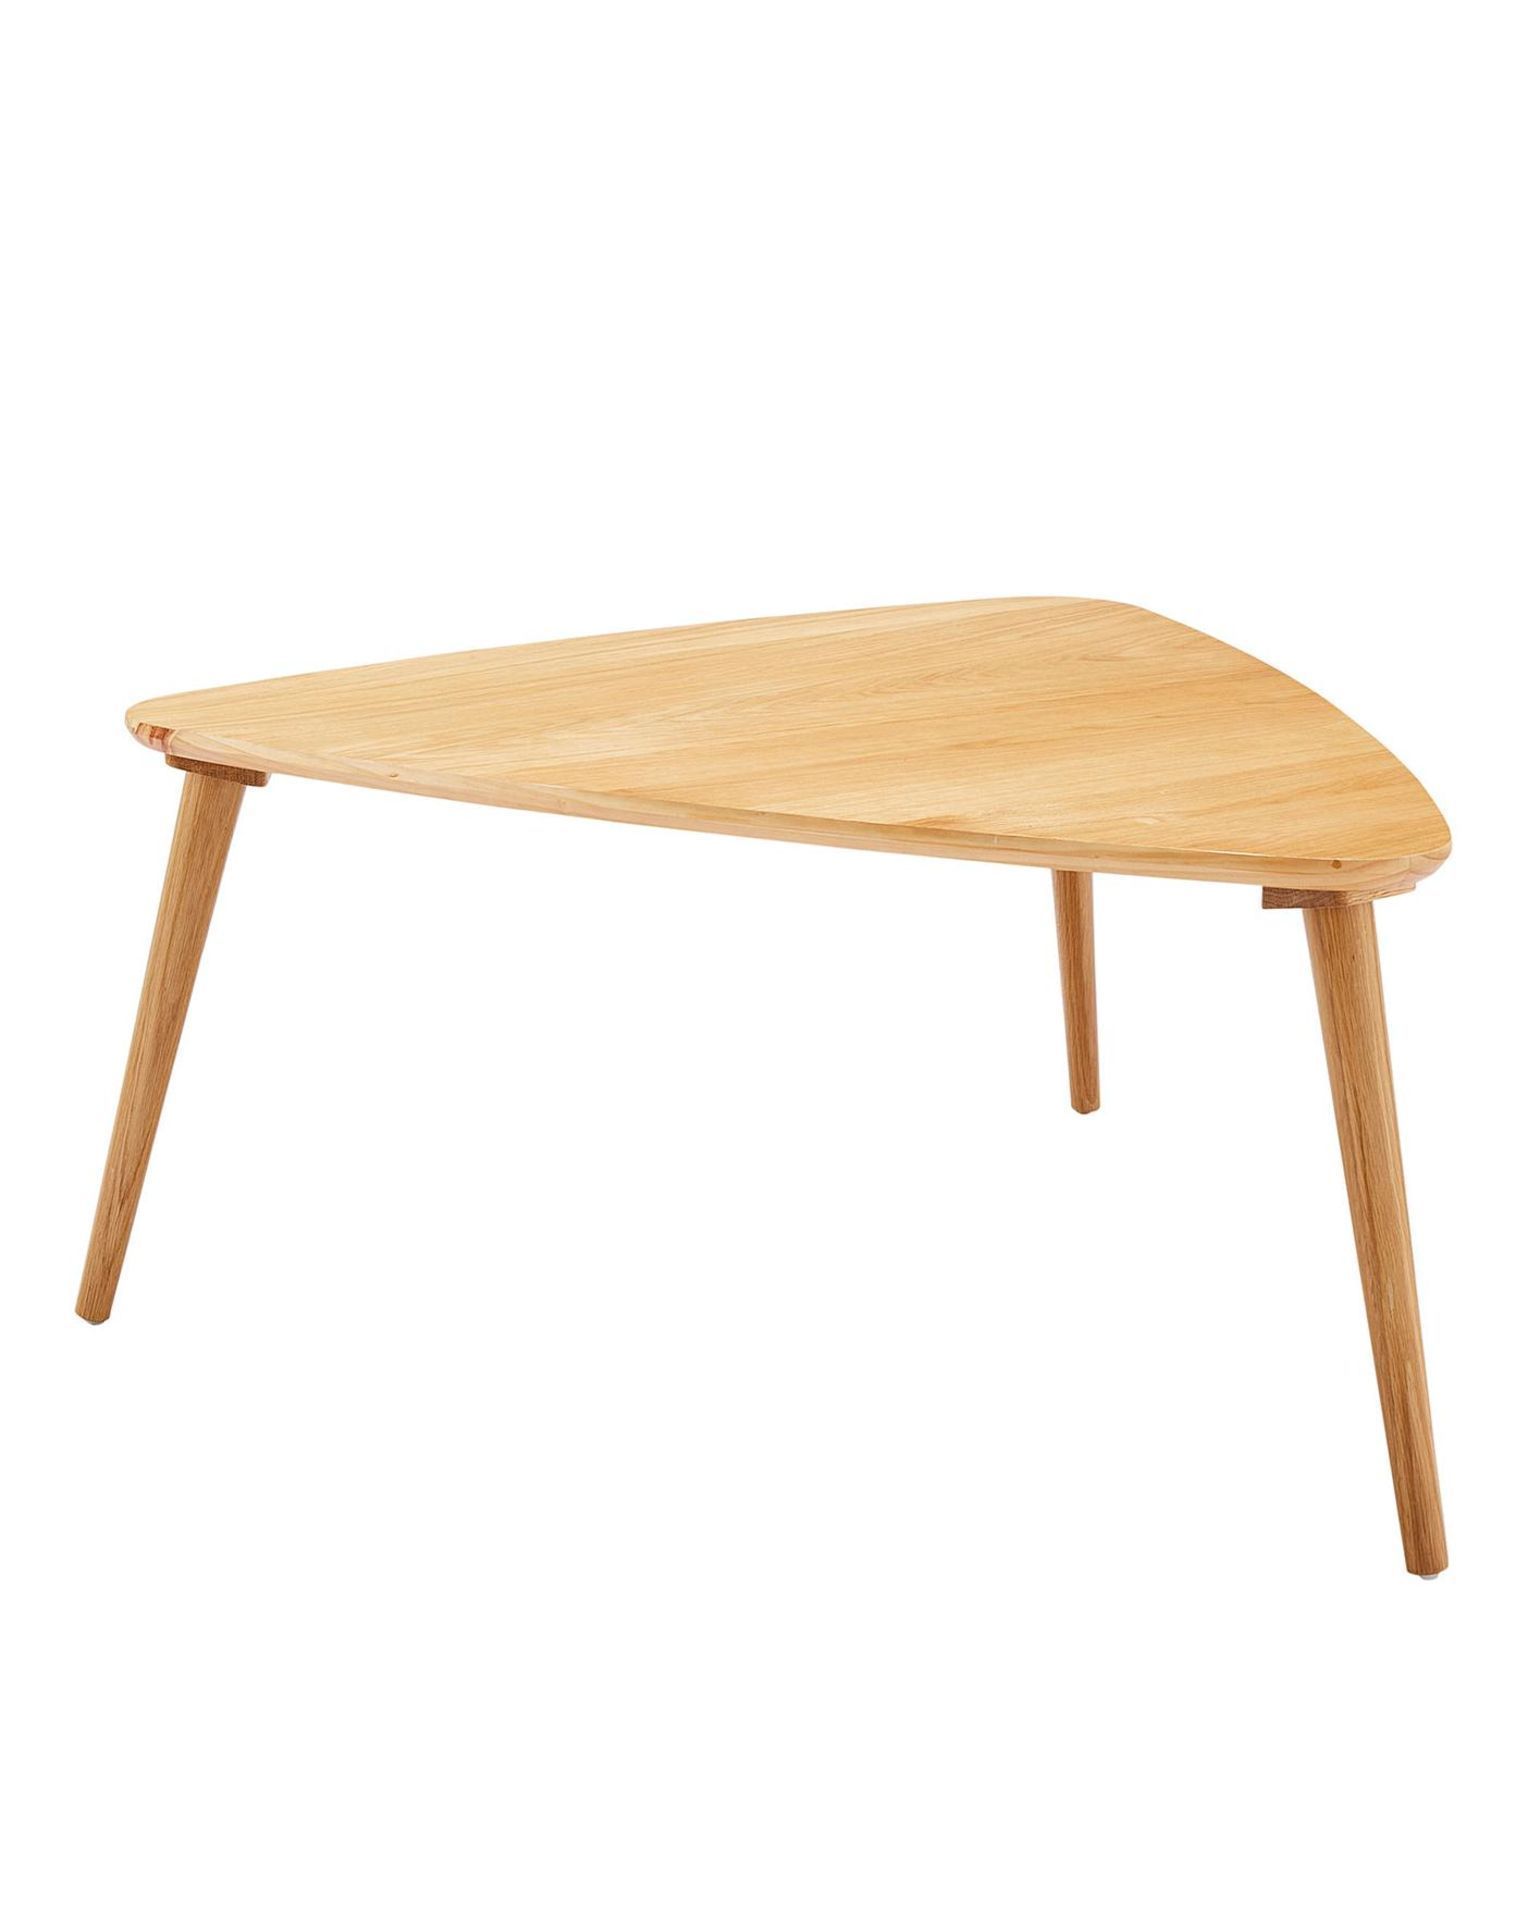 NEW & BOXED PEYTON Oak Coffee Table. RRP £269 R13-11. Part of At Home Luxe, the Peyton Oak Coffee - Image 2 of 2